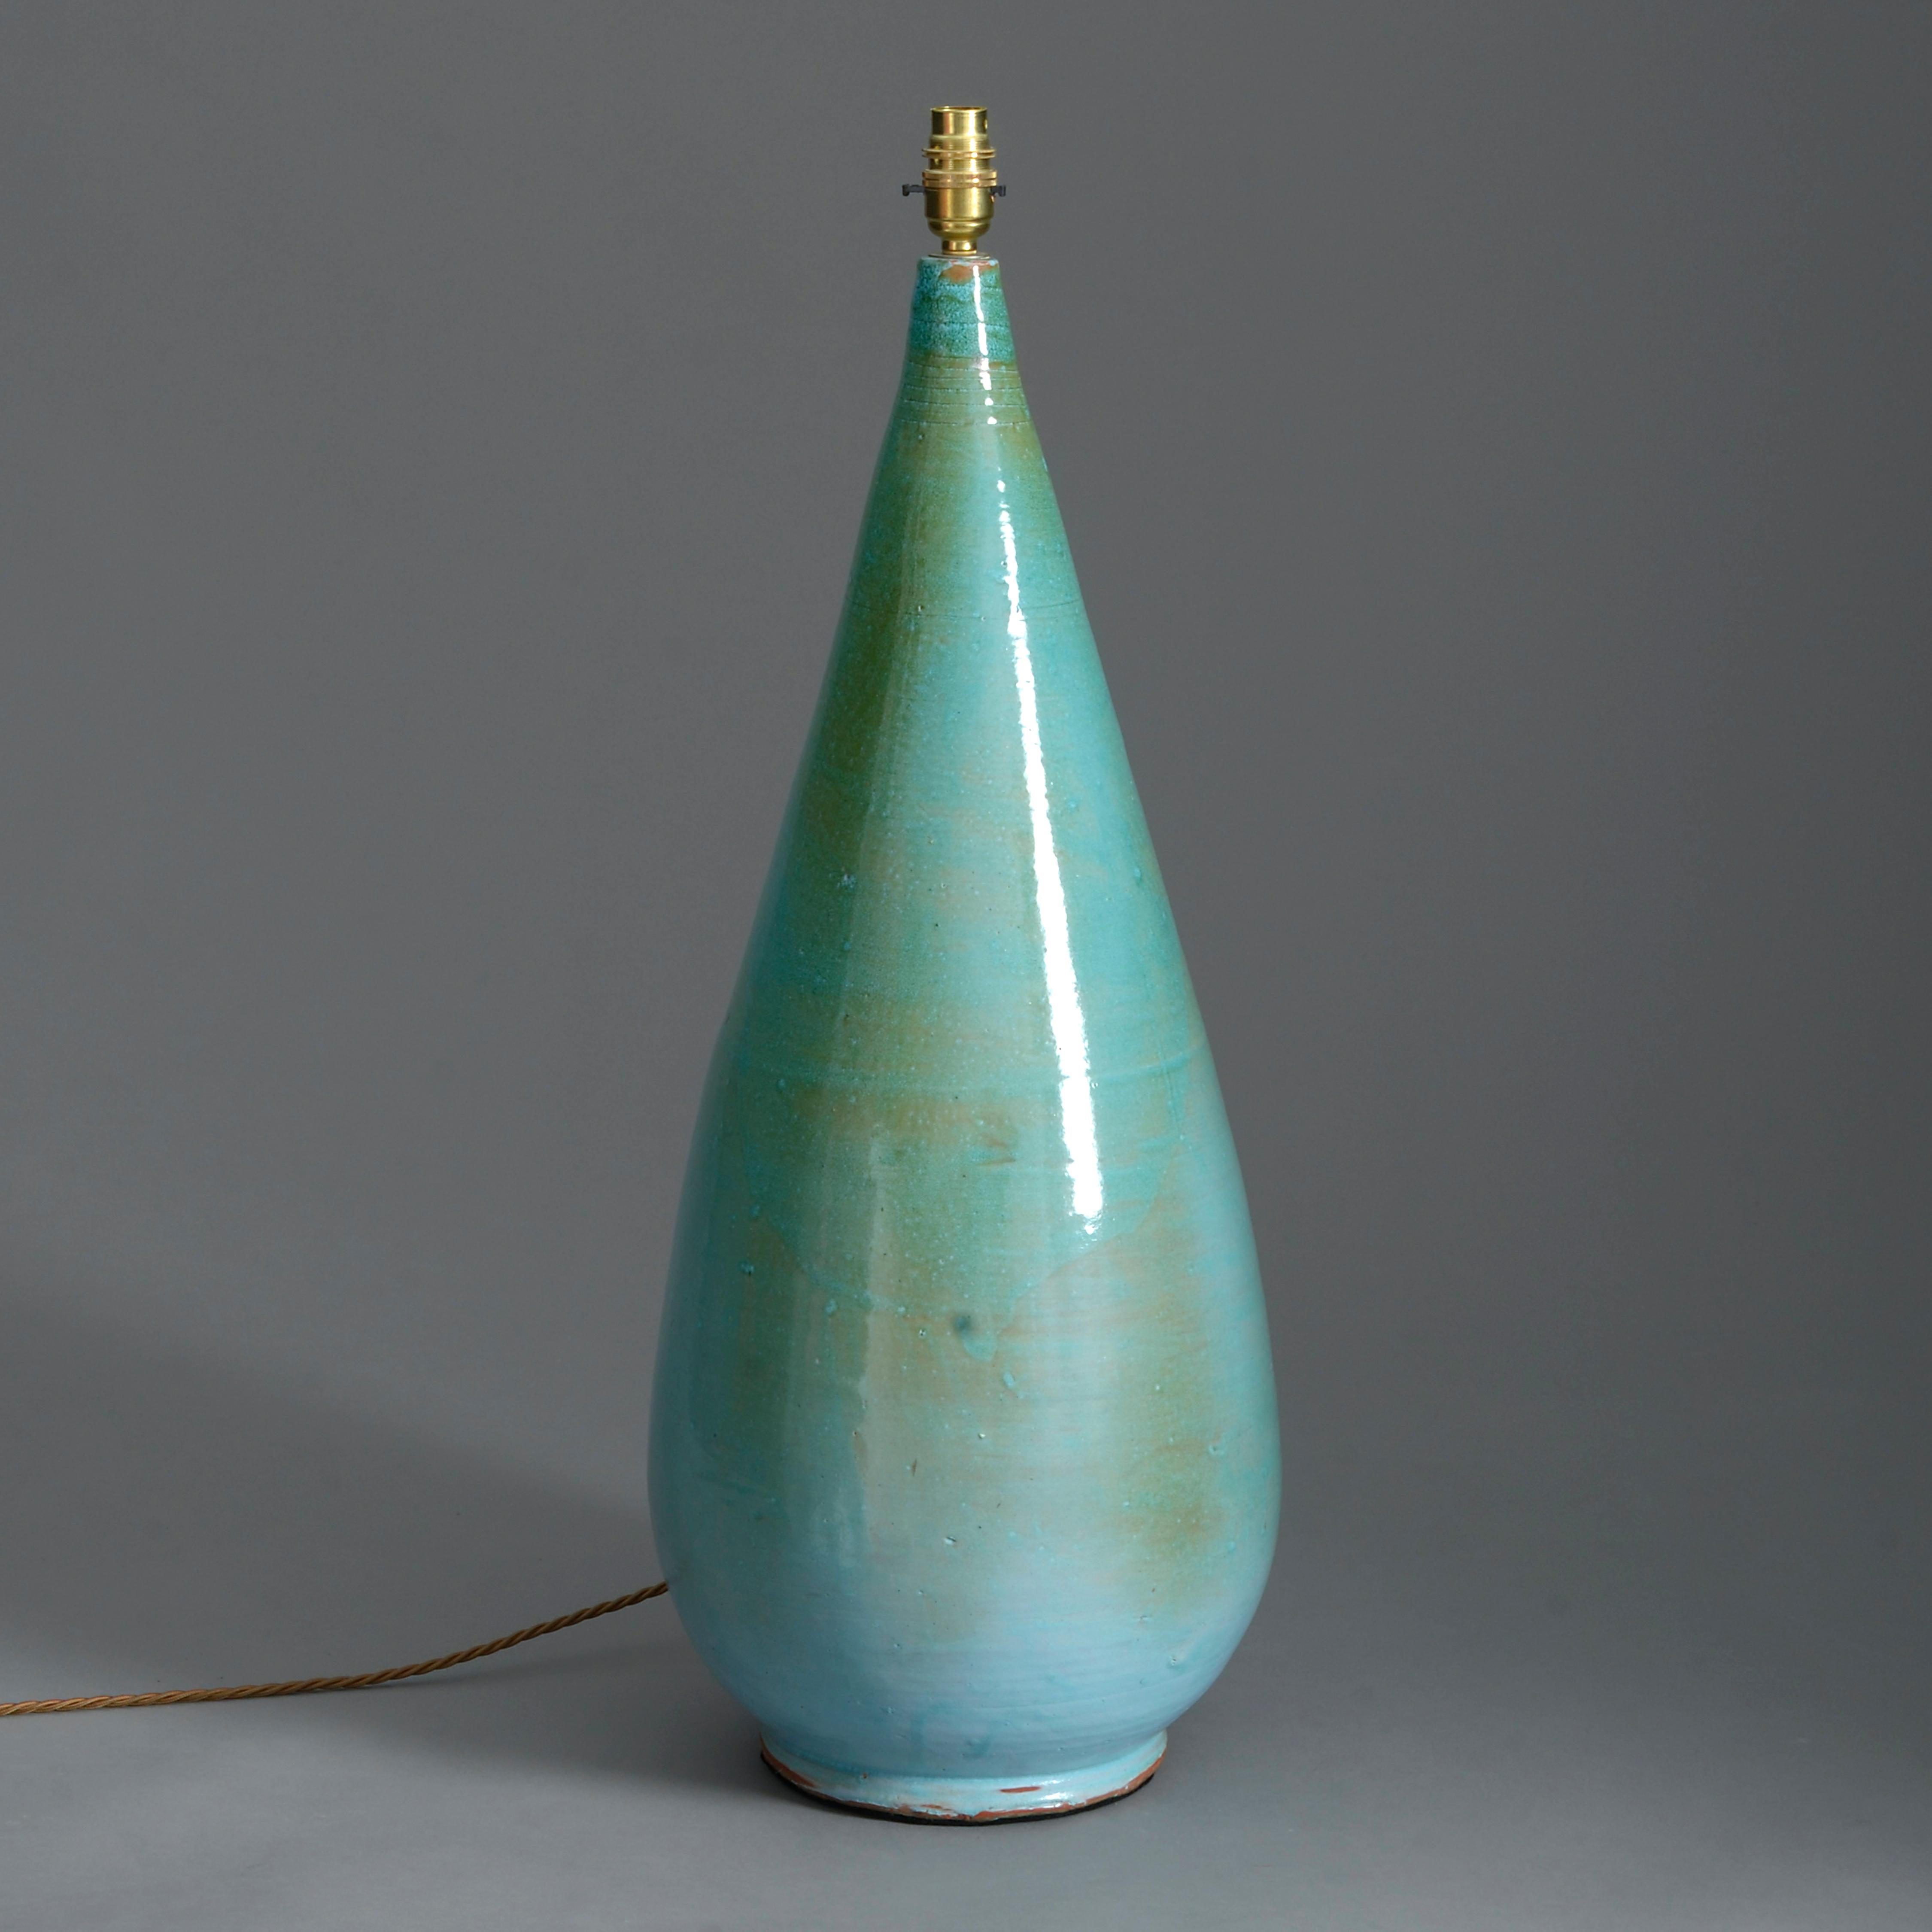 A tall mid-20th century Studio Pottery vase, the body with a striking variegated turquoise glaze.

Dimensions refer to ceramic elements only.